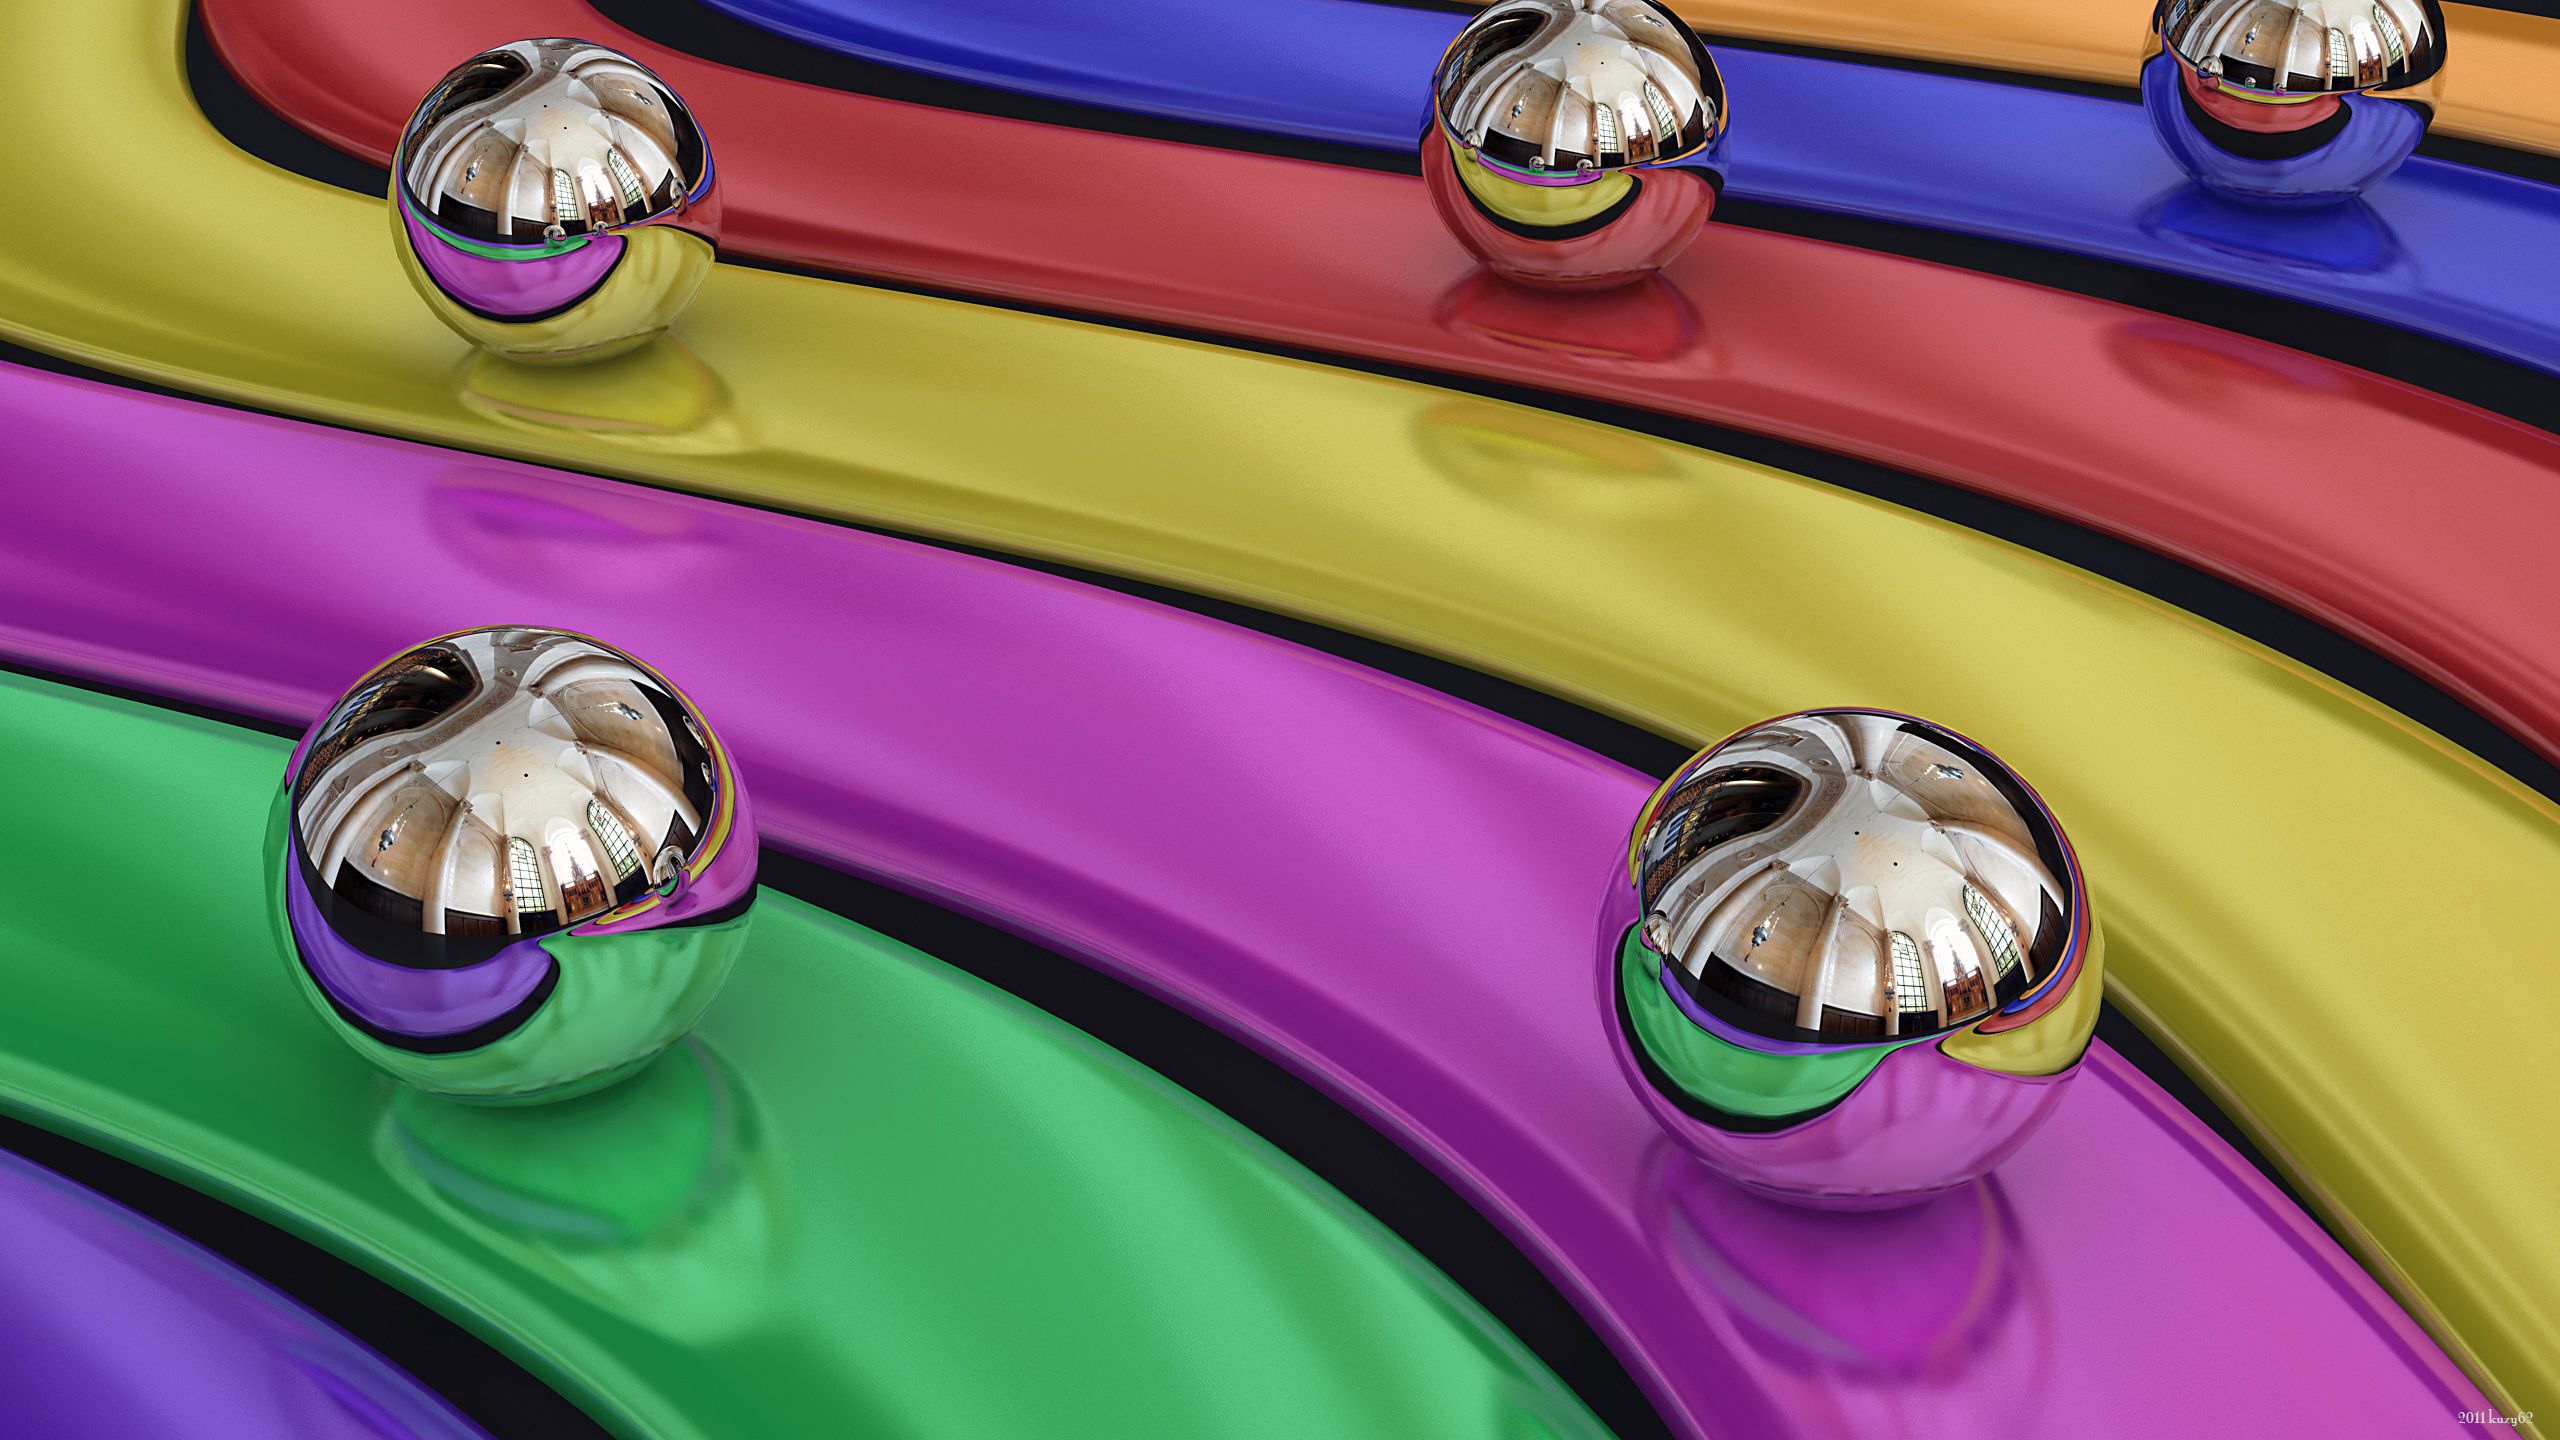 Wallpaper for mobile devices rainbow, iridescent, motley, balls